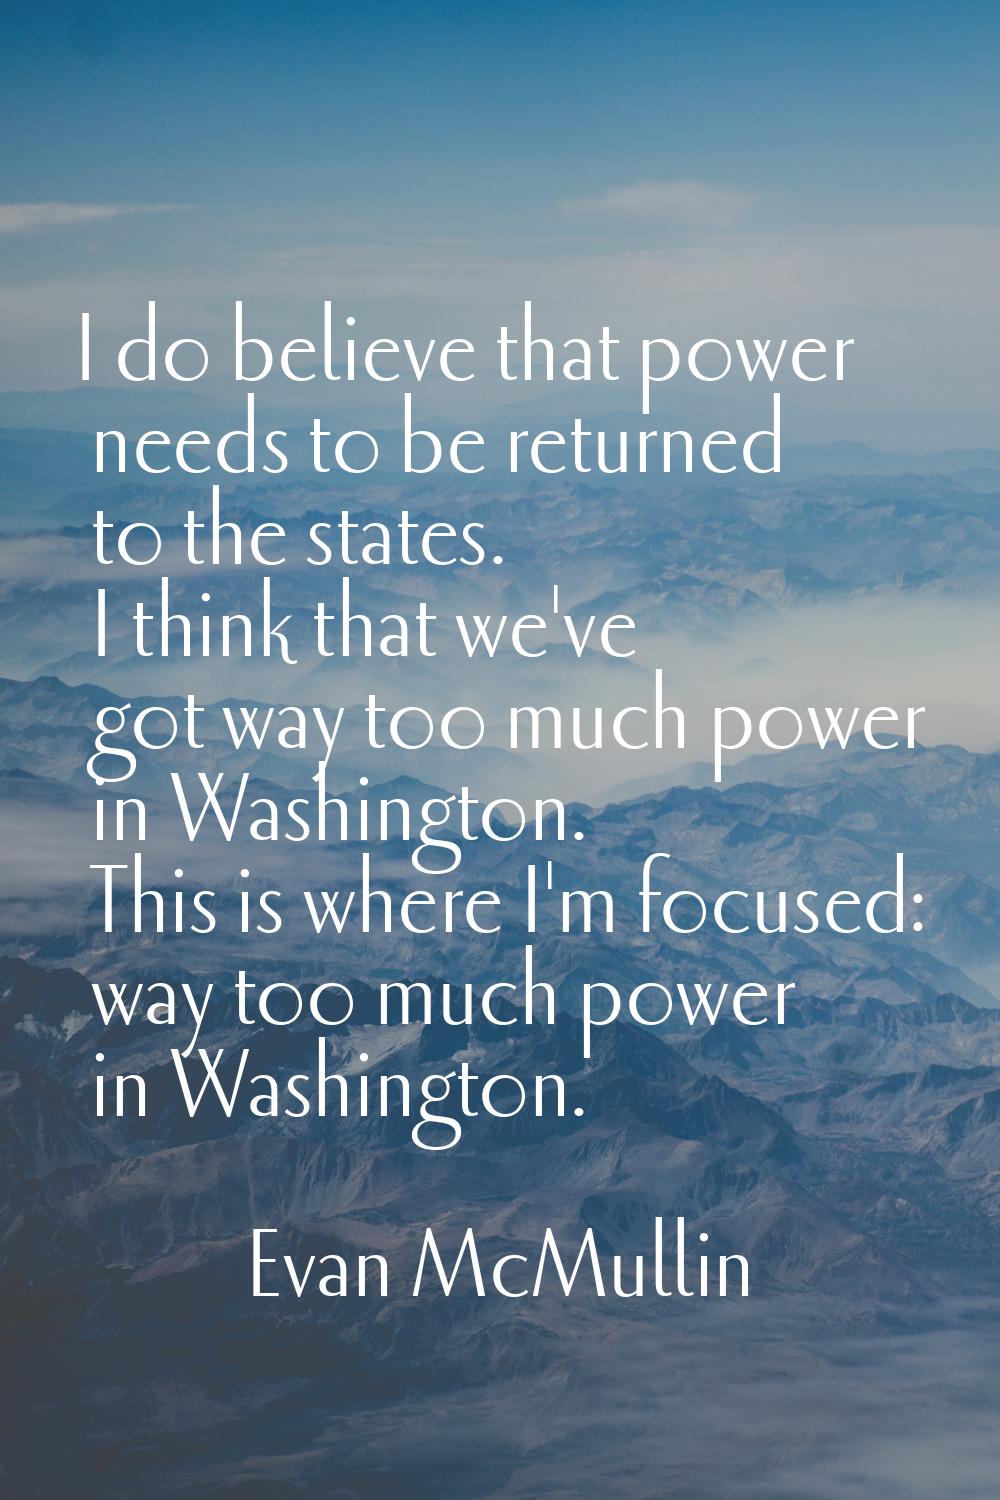 I do believe that power needs to be returned to the states. I think that we've got way too much pow